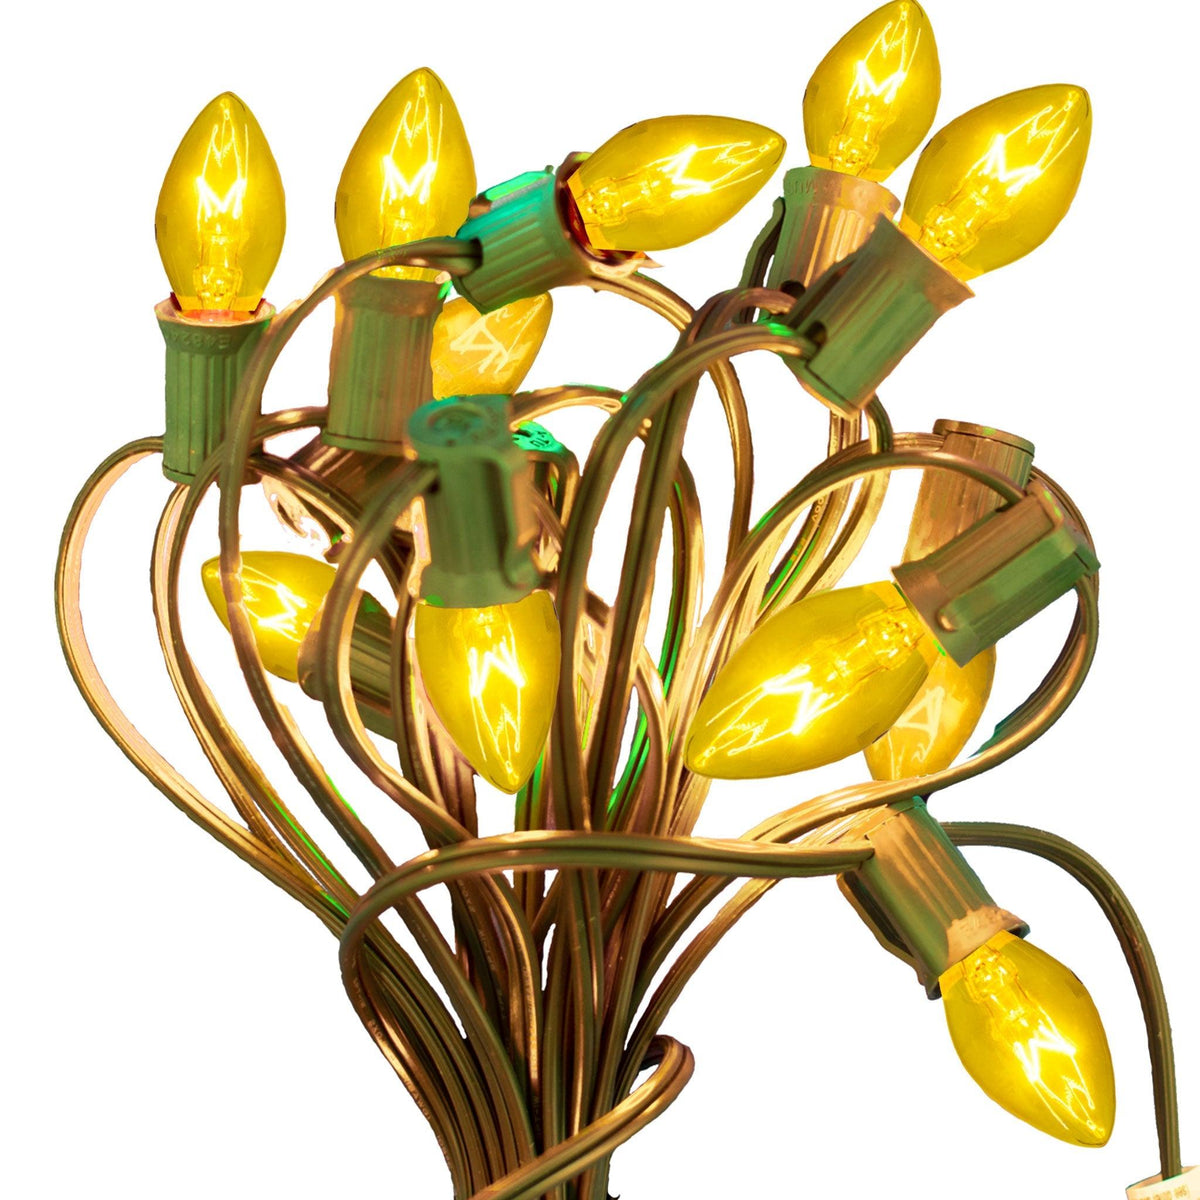 25FT C7/C9 Candelabra Style Gold Outdoor Magnetic String Lighting Set with Bulbs Included. Available at leedisplay.com